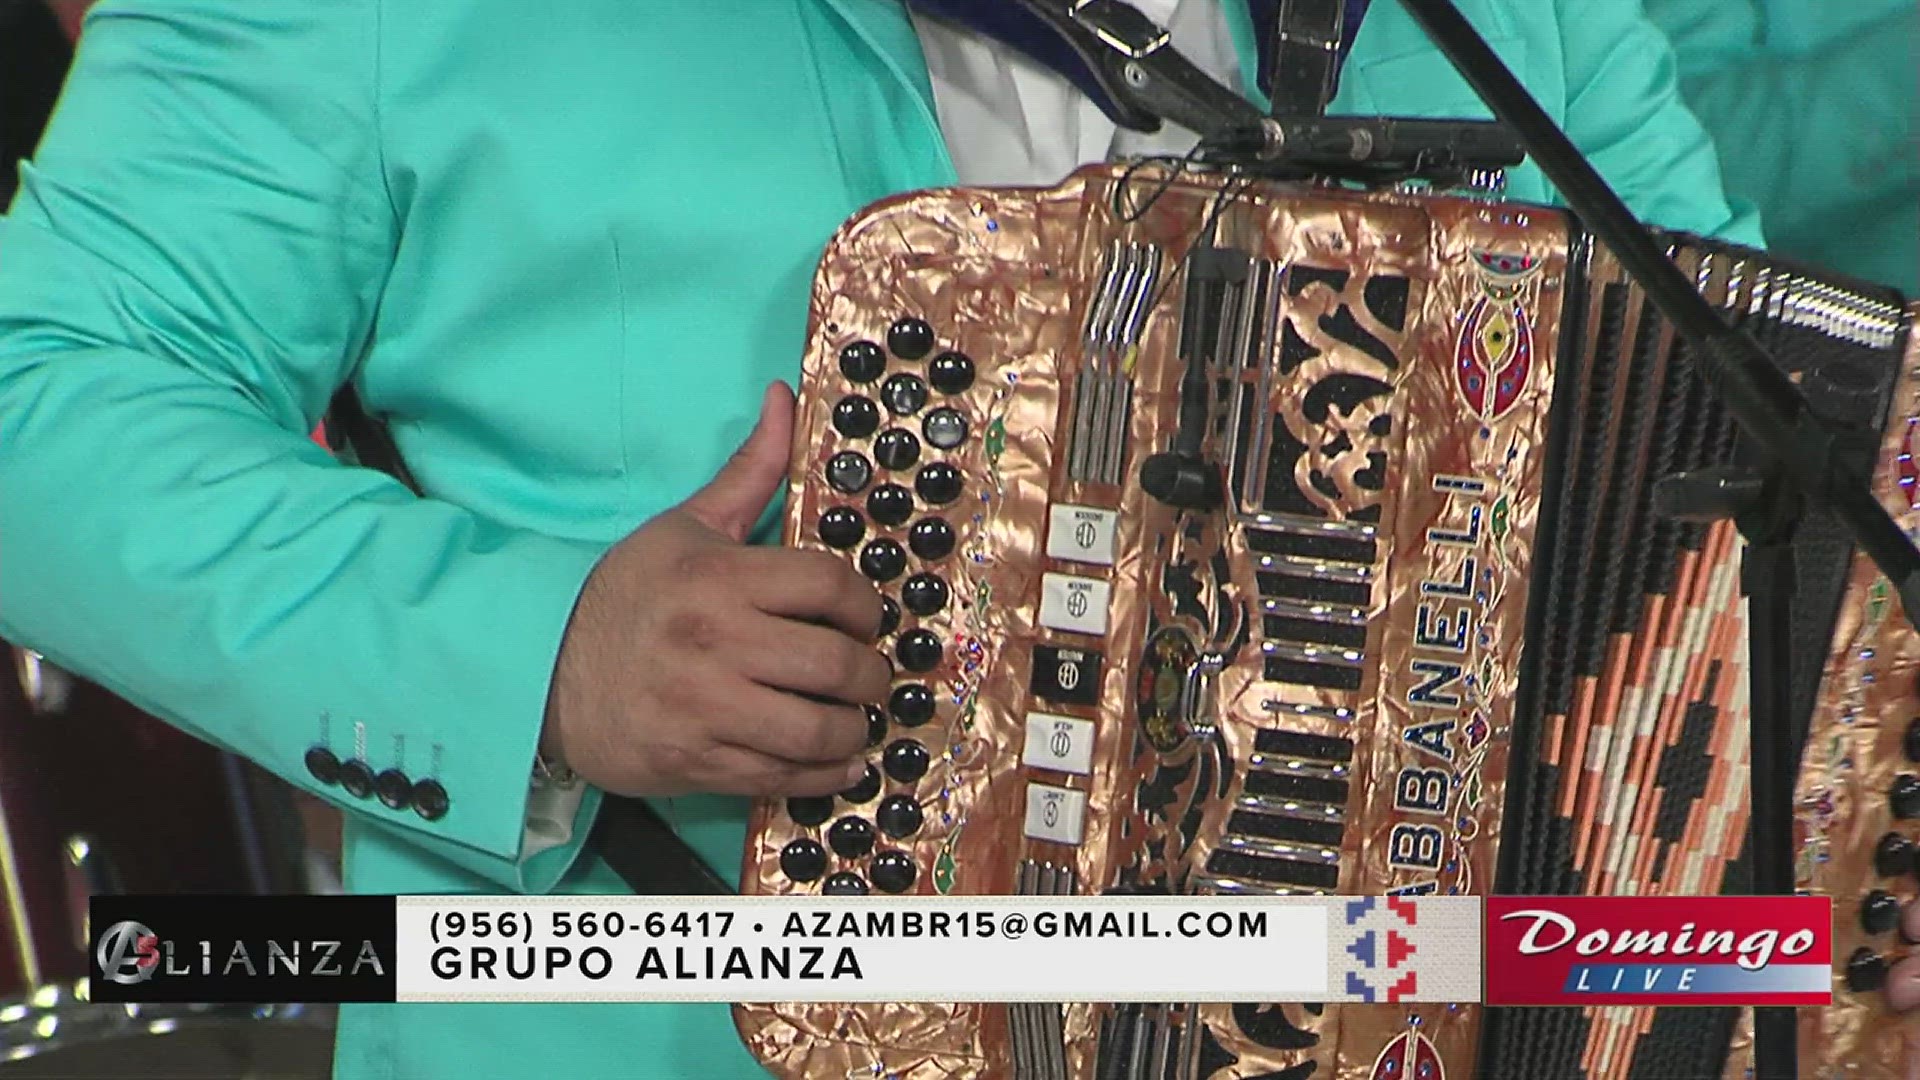 Groupo Alianza from Plainview, Texas plays their song, "Creo En Ti" for Domingo Live.